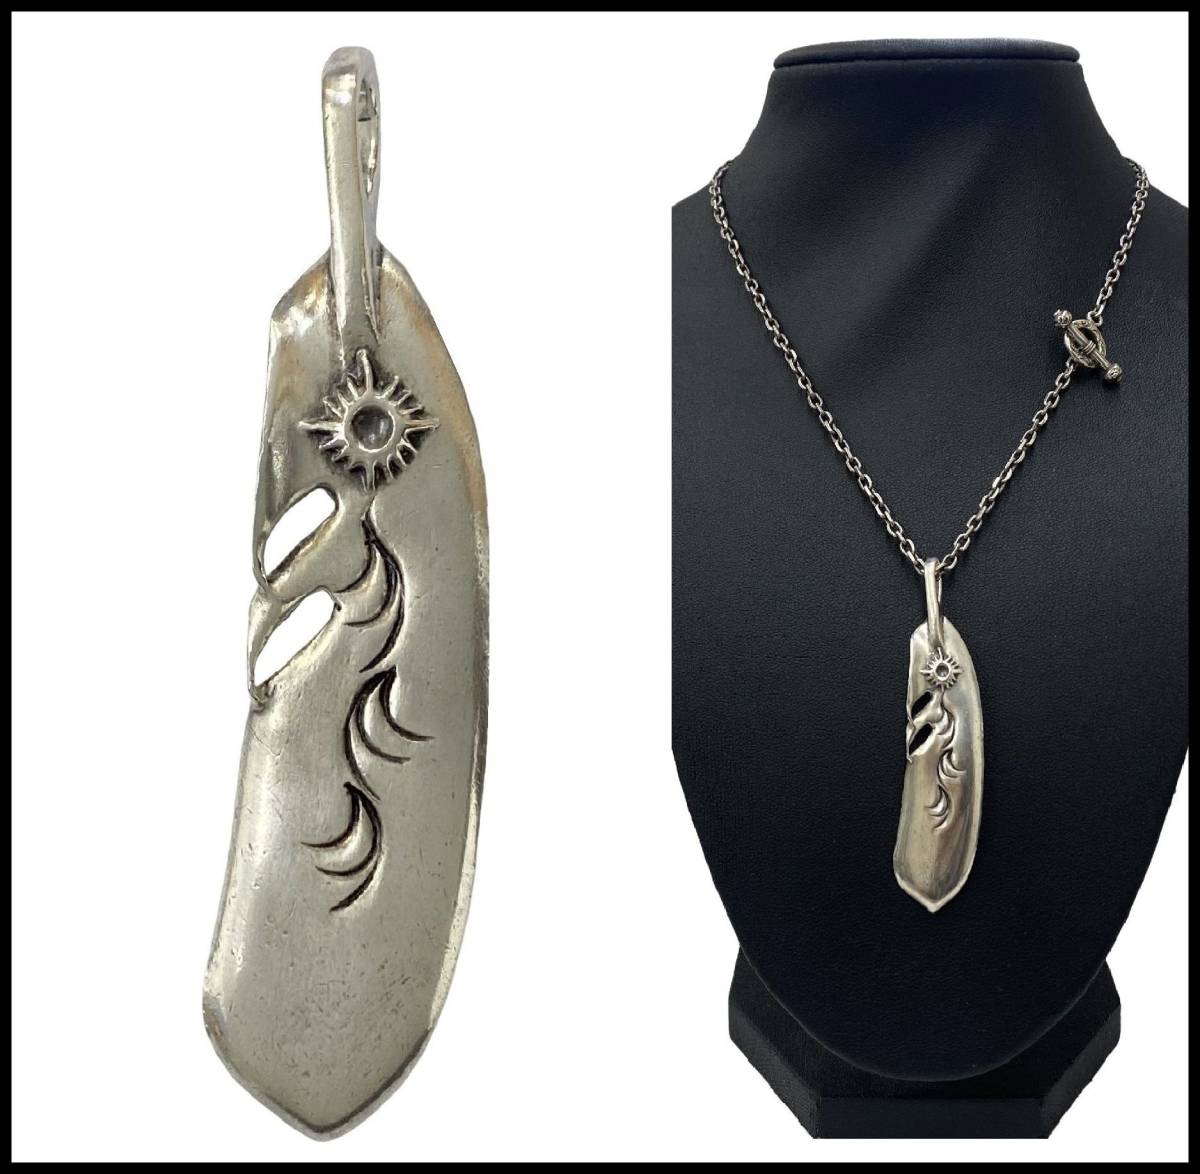 ARIZONA FREEDOM have zona freedom silver 925 all silver sun god Tang .70mm feather pendant top charm necklace Eagle 